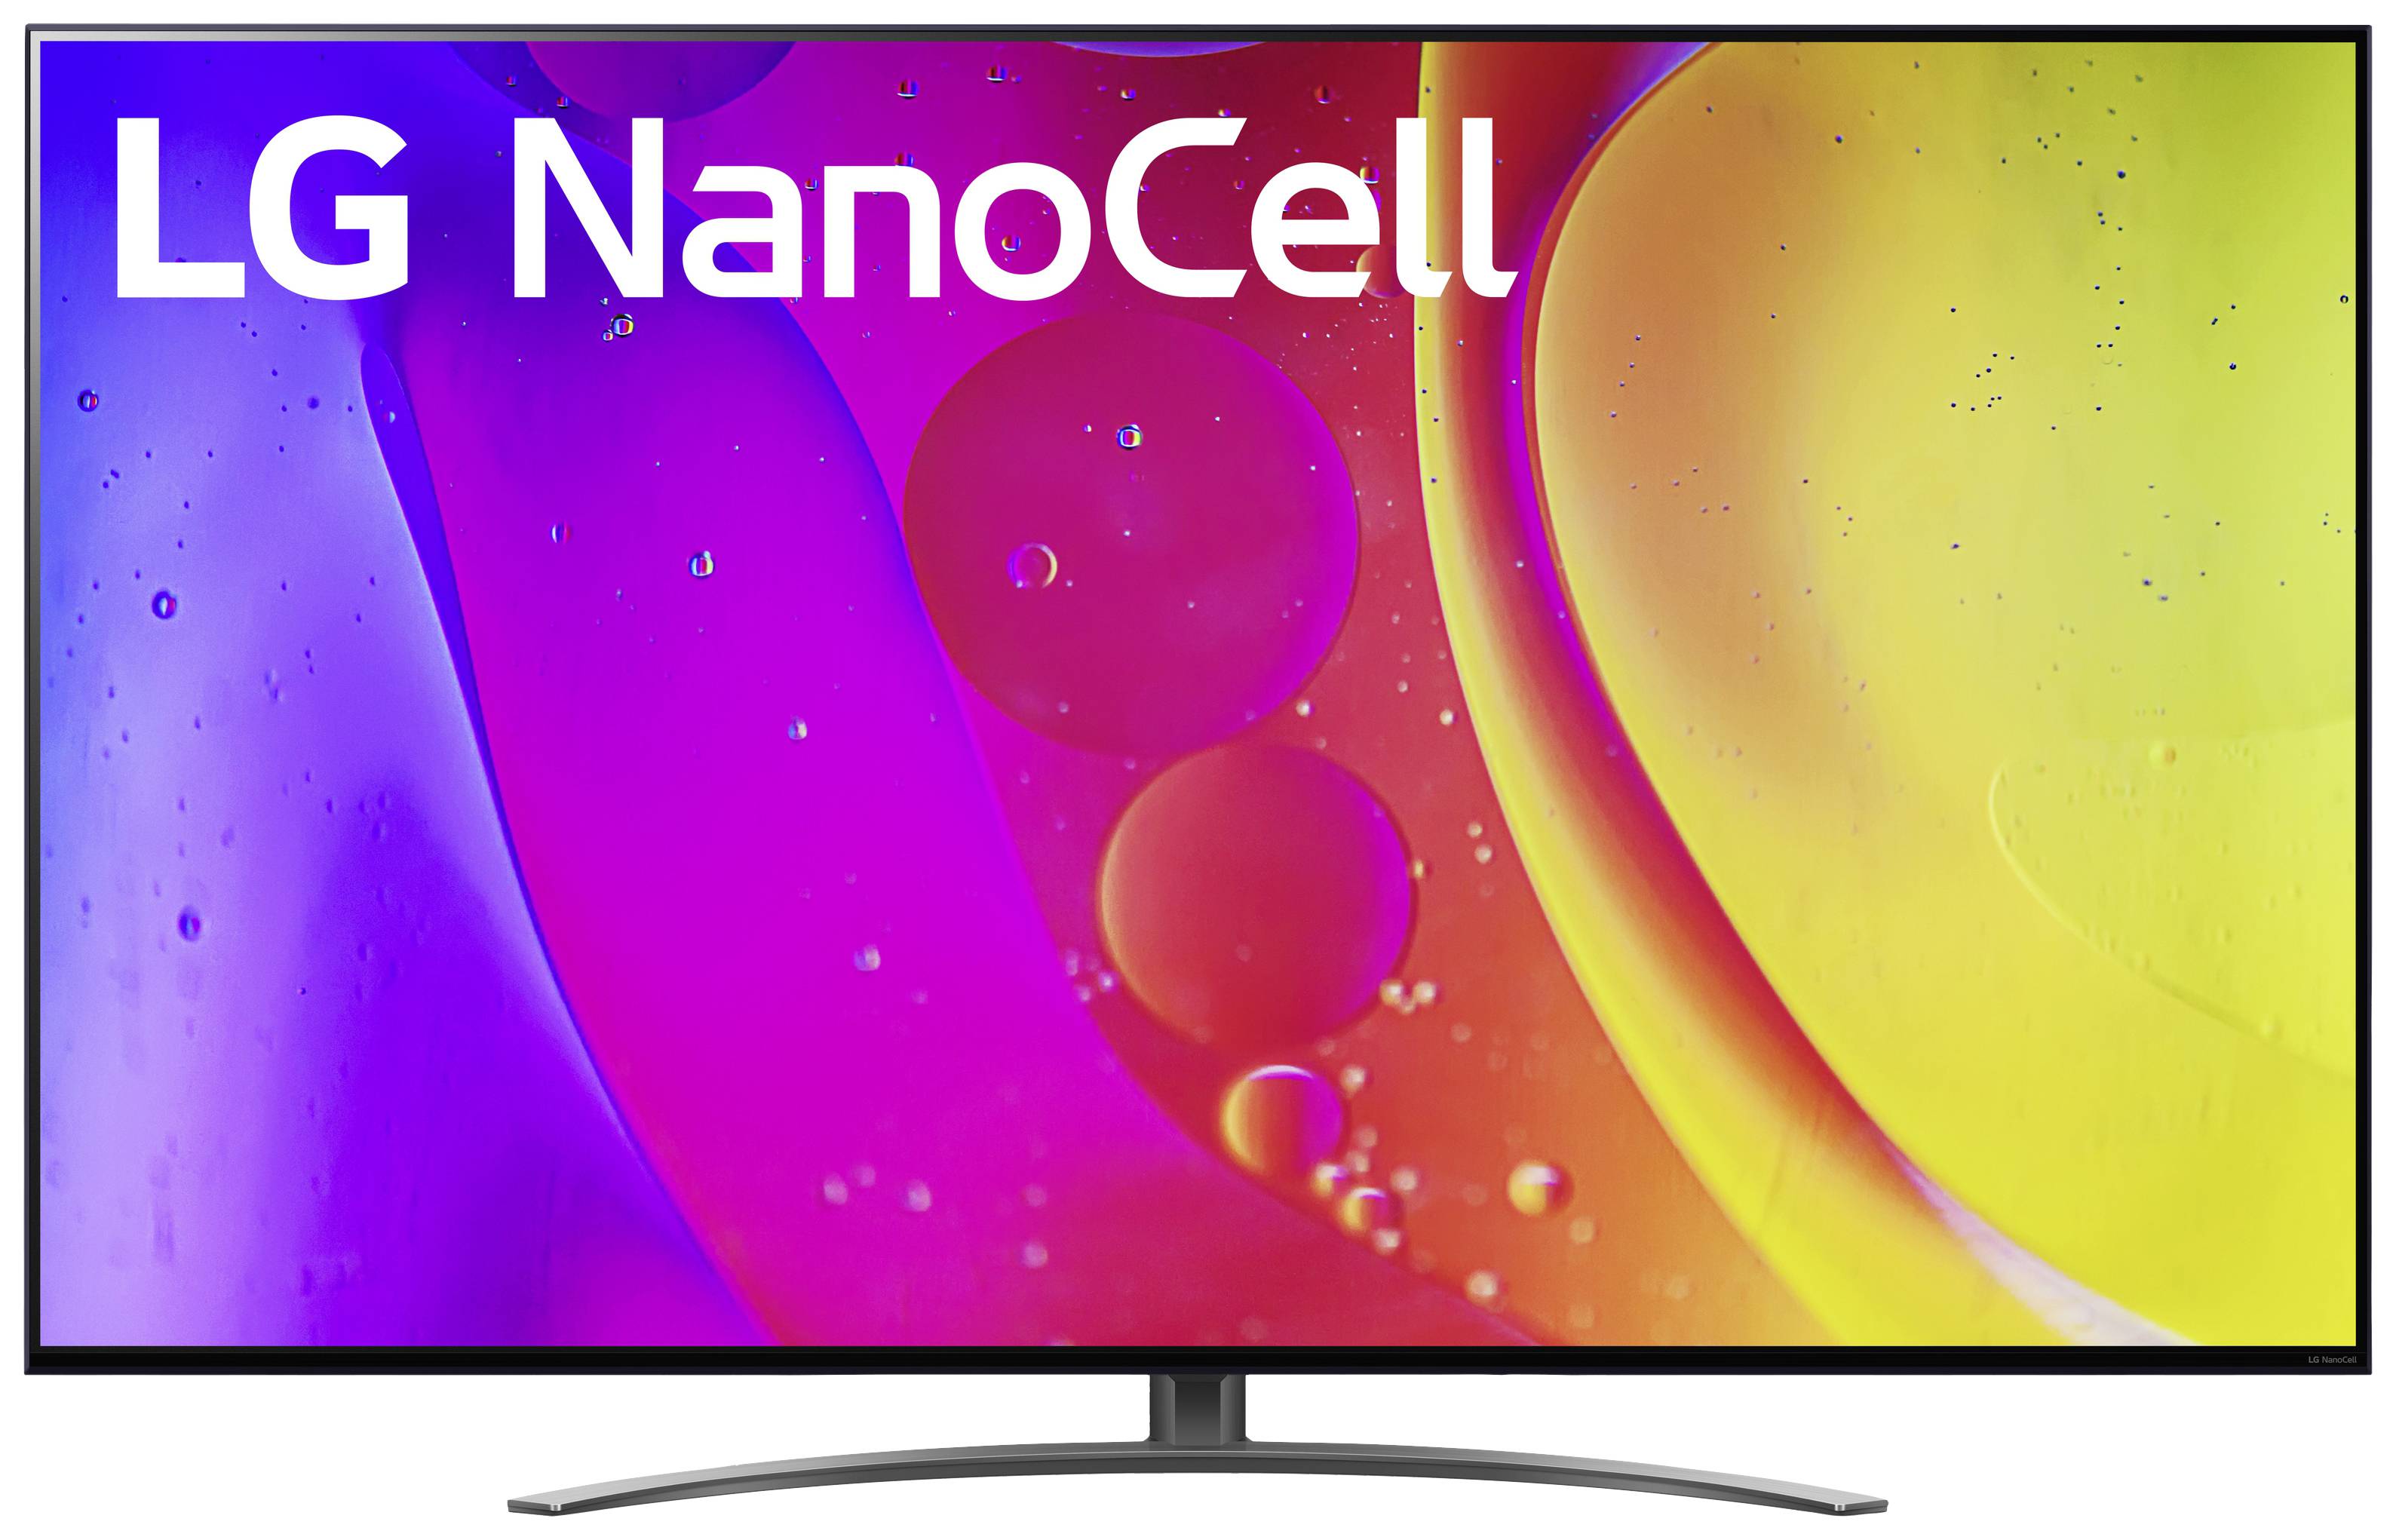 Телевизор lg 55 2023. Телевизор LG 55 Nano. LG 55nano806qa 2022 HDR, NANOCELL. LG 65nano806qa. LG 50nano826qb 2022 NANOCELL, HDR.